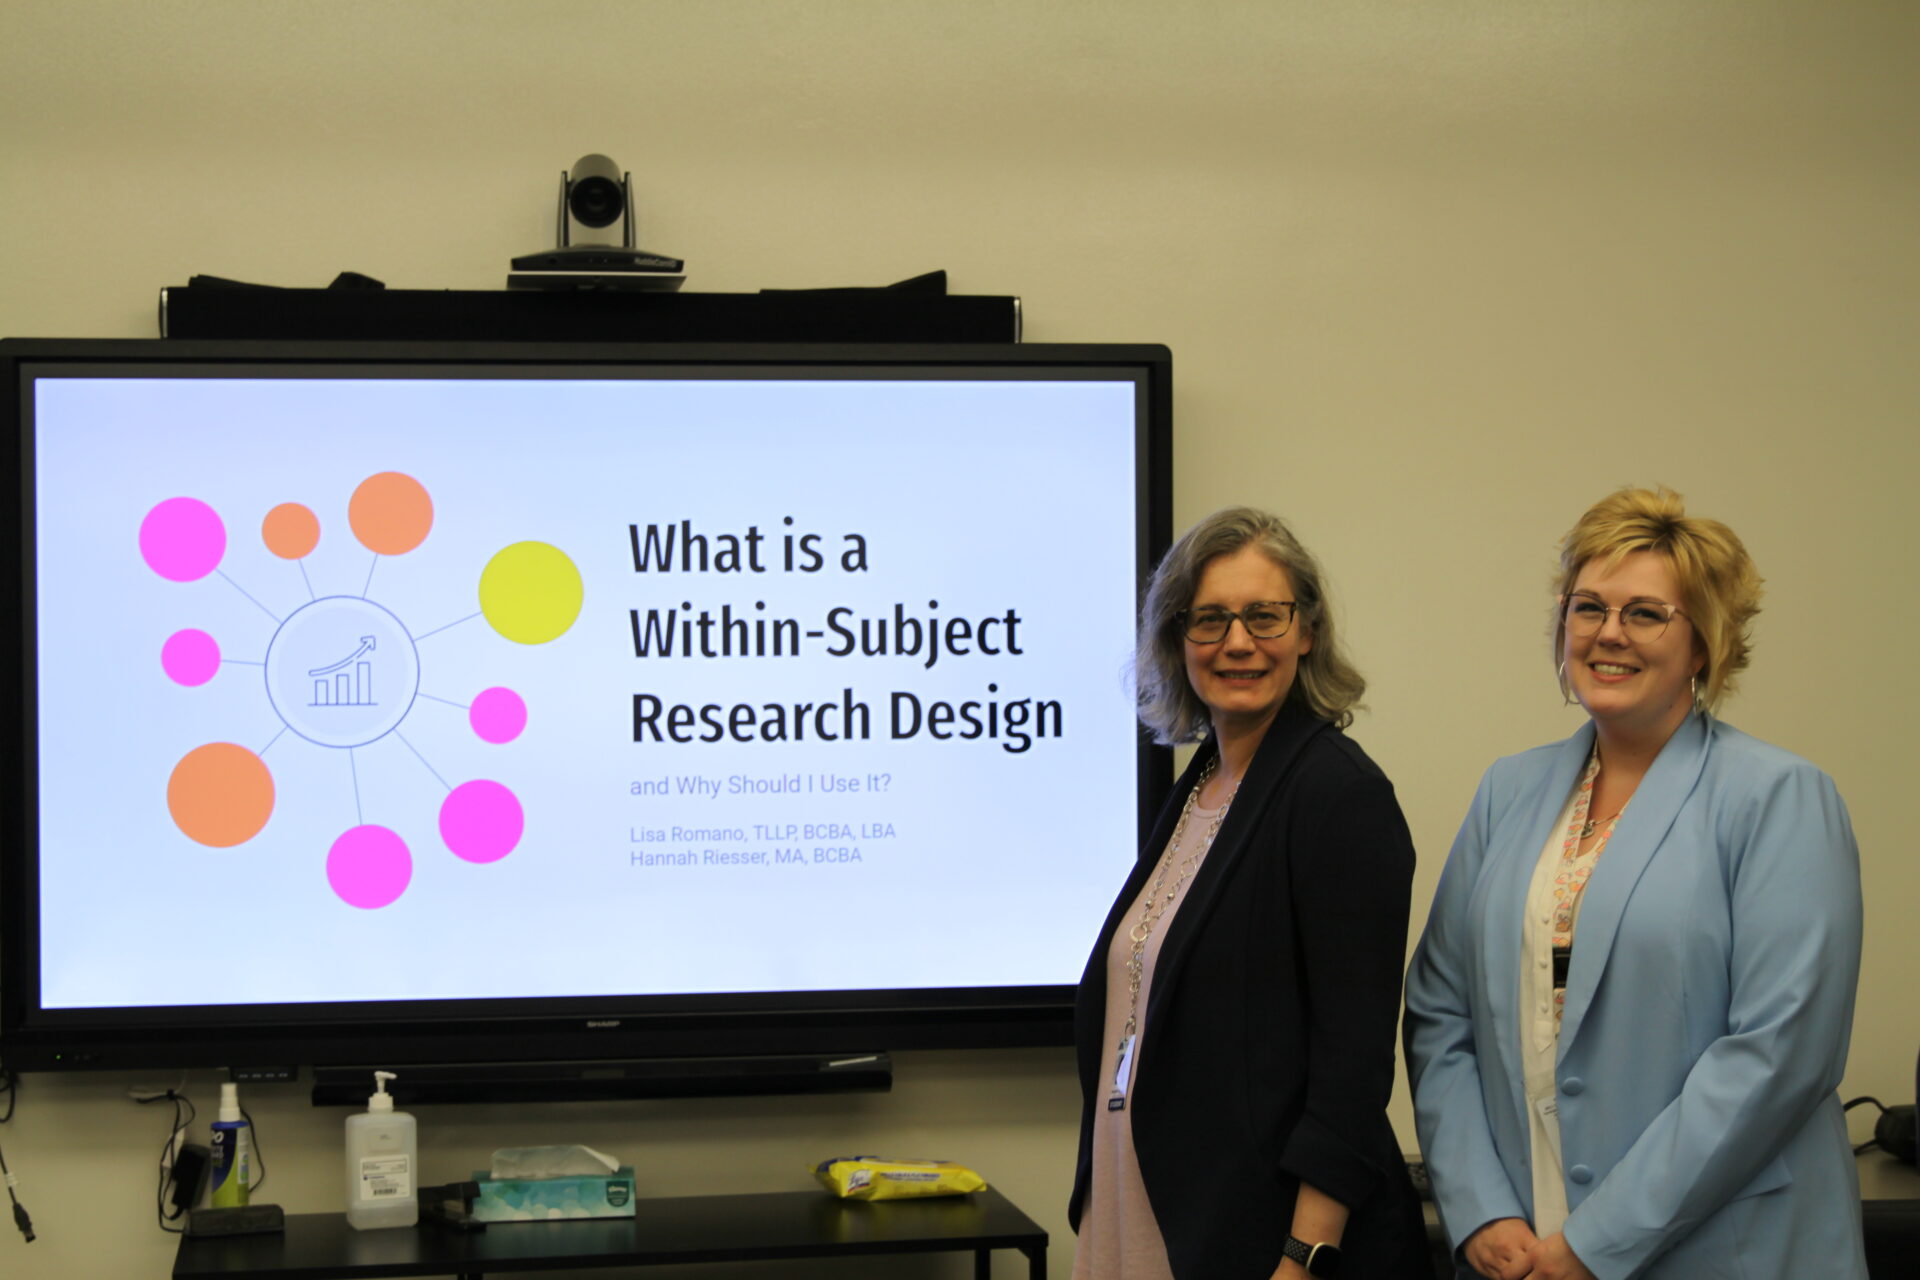 Elizabeth Romano (MA with ABA '20, PsyD 2) and Hannah Riesser (MA with ABA '21, PsyD 2) gave a Panel Presentation titled "What is Within-Subject Research Design and Why Should We Use it?"